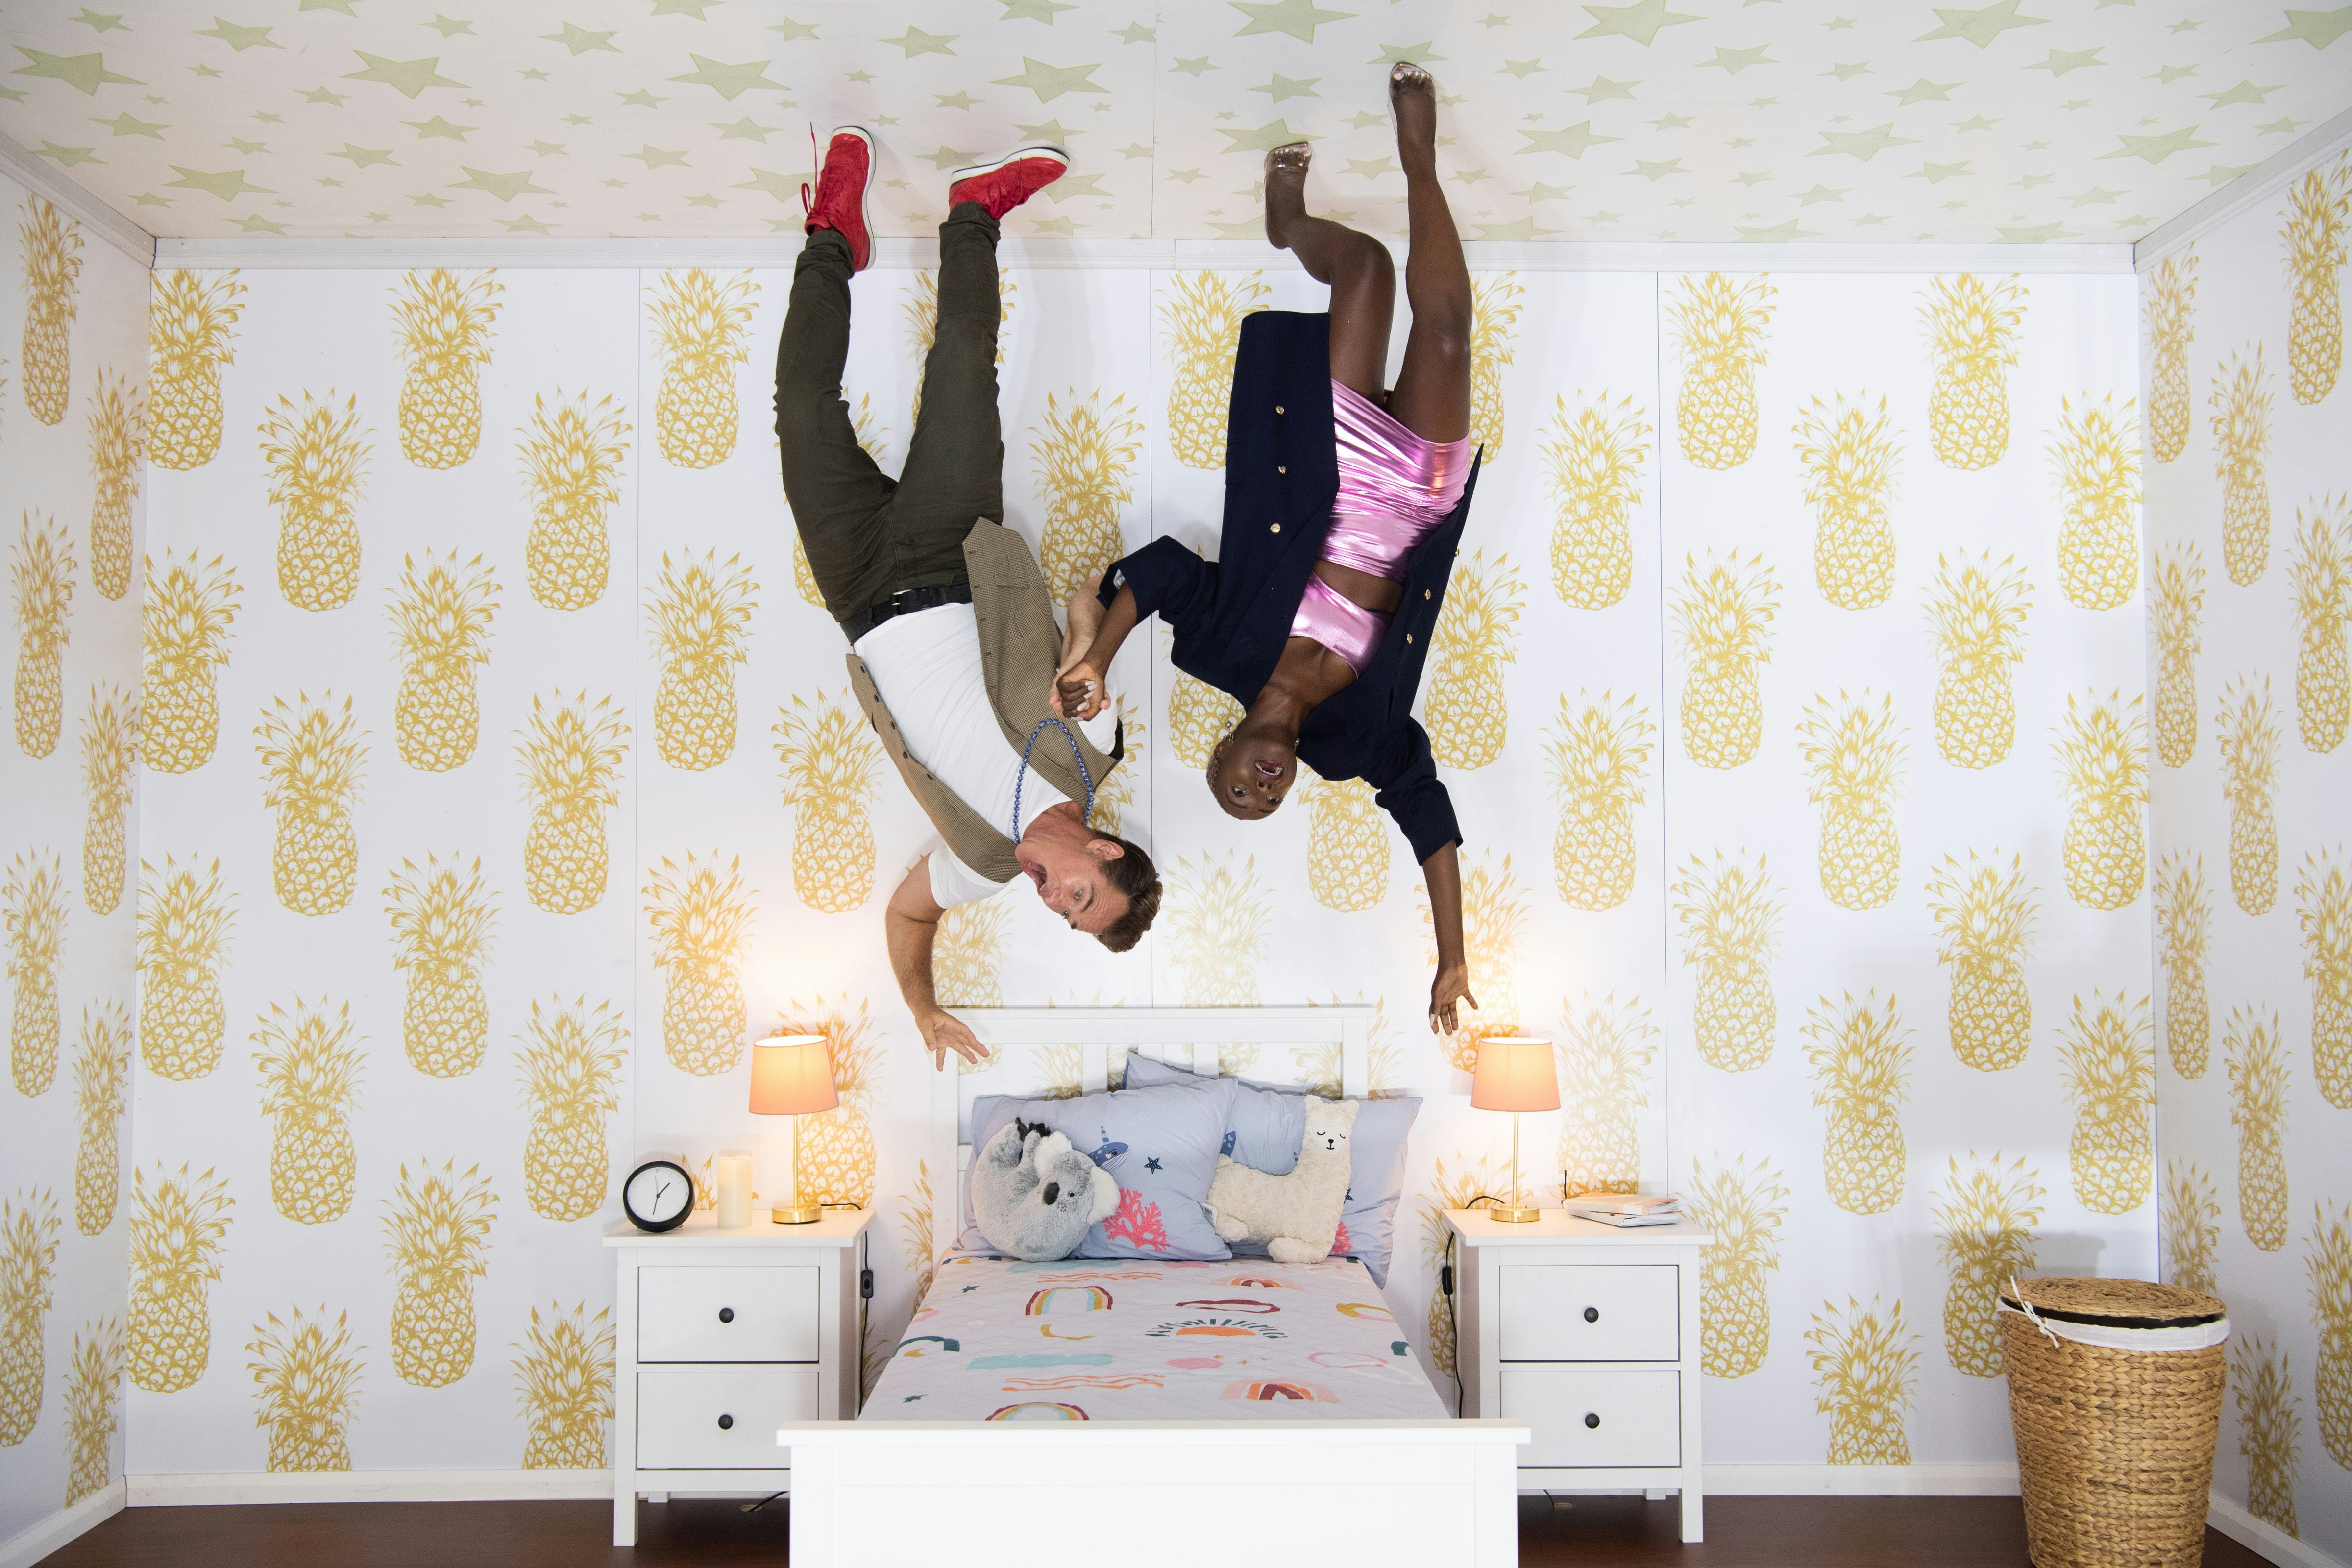 Visitors play in an 'upside-down bedroom' at an exhibit in Sydney